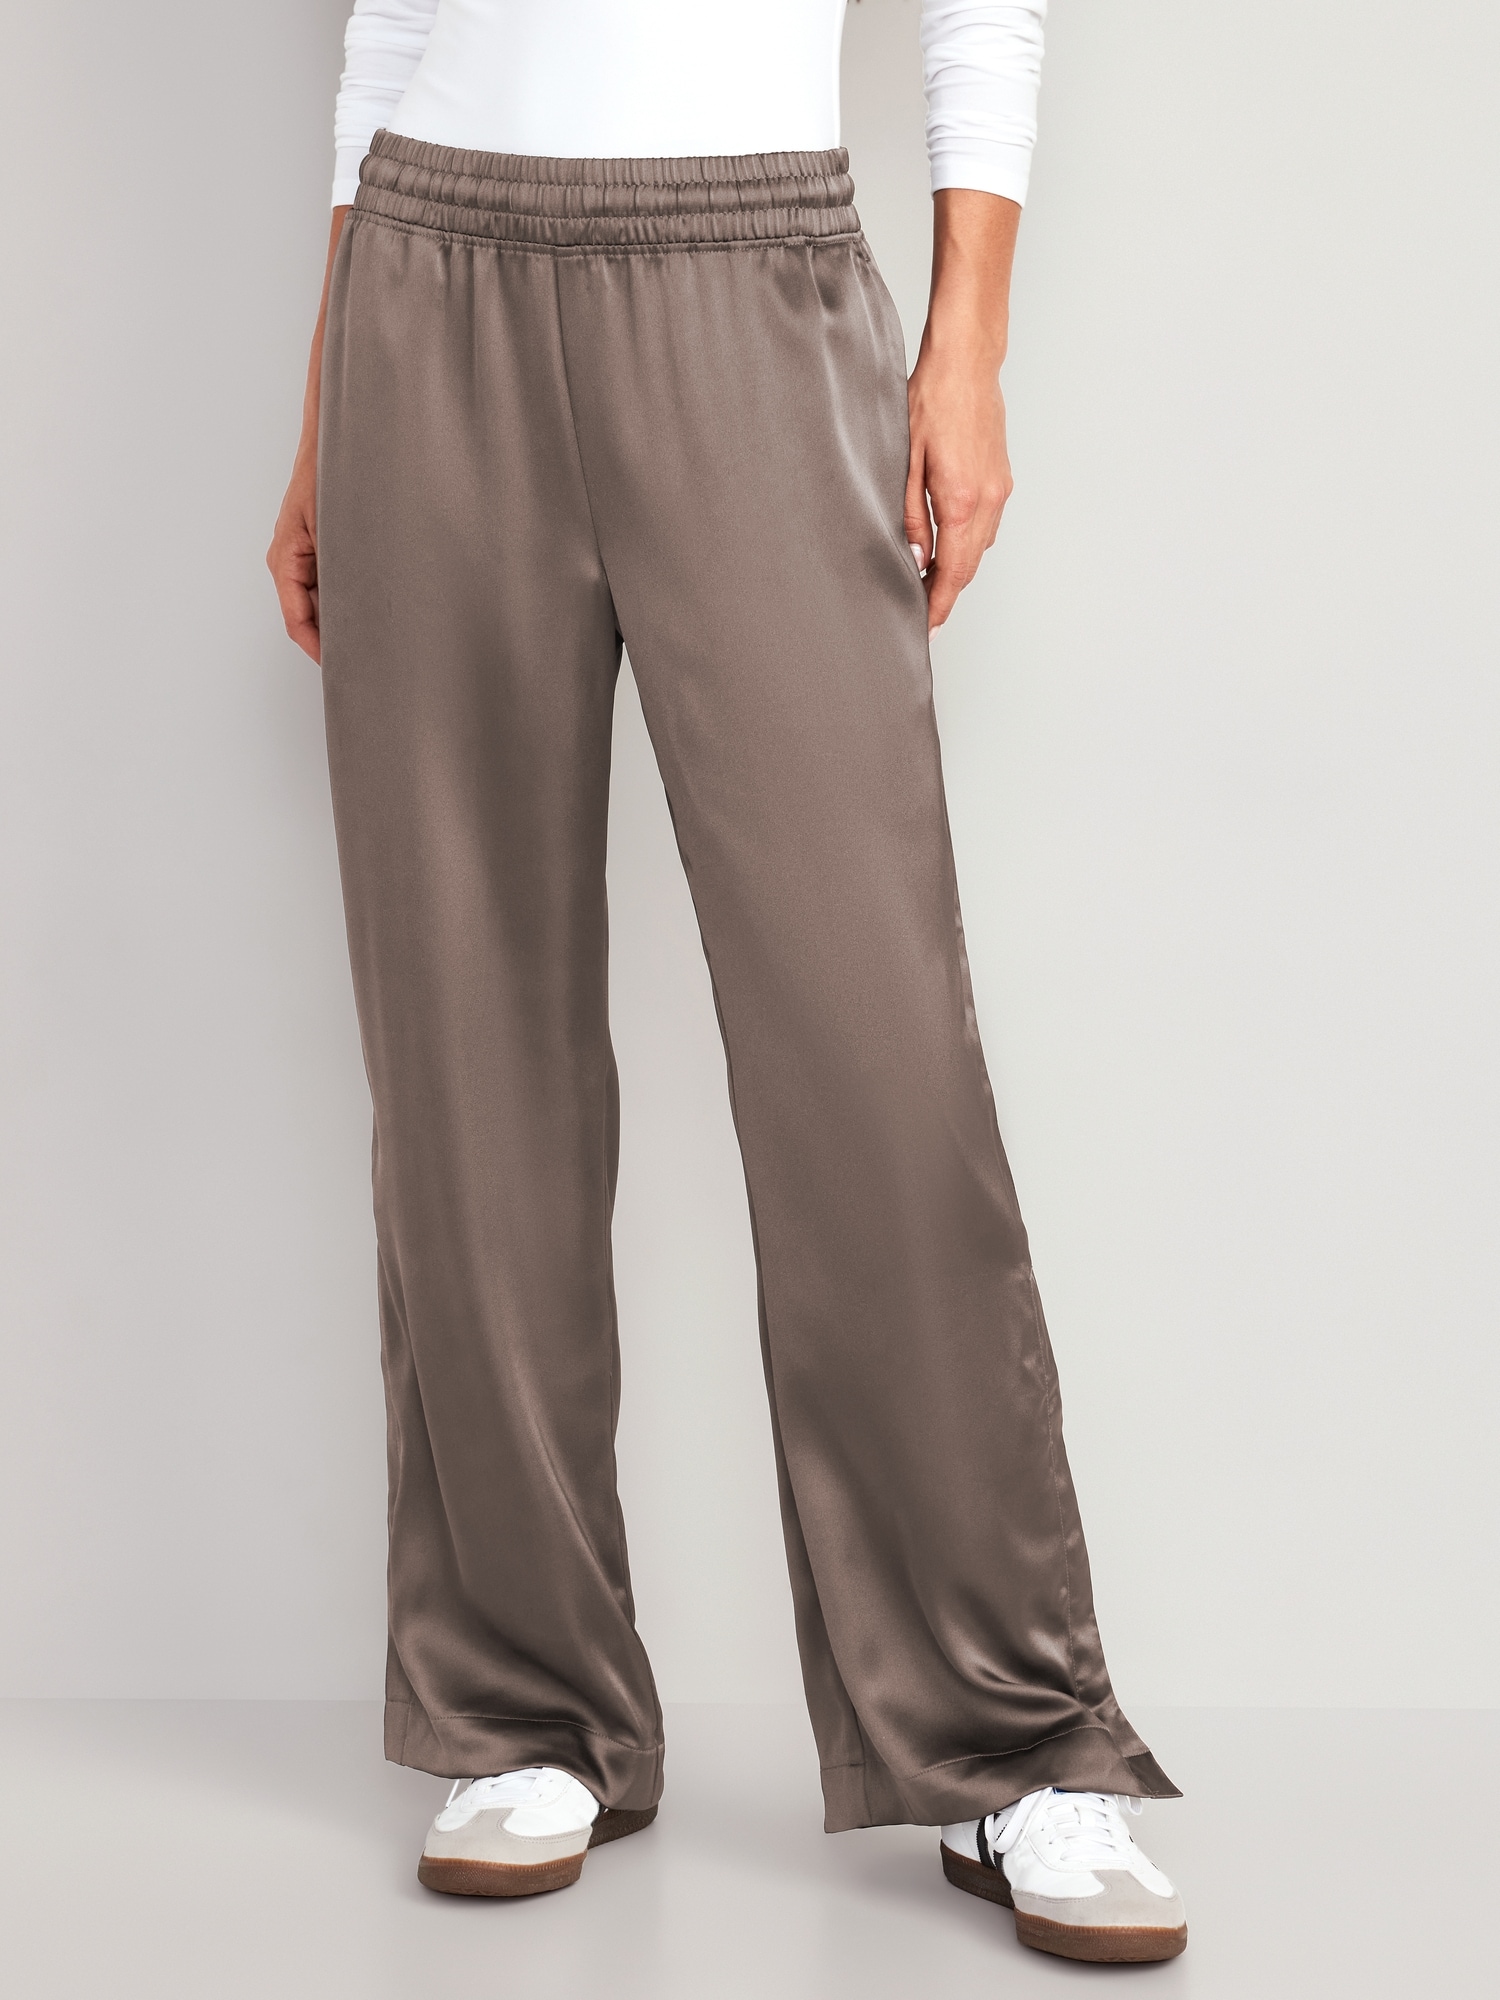 Old Navy Elastic Waist Athletic Pants for Women